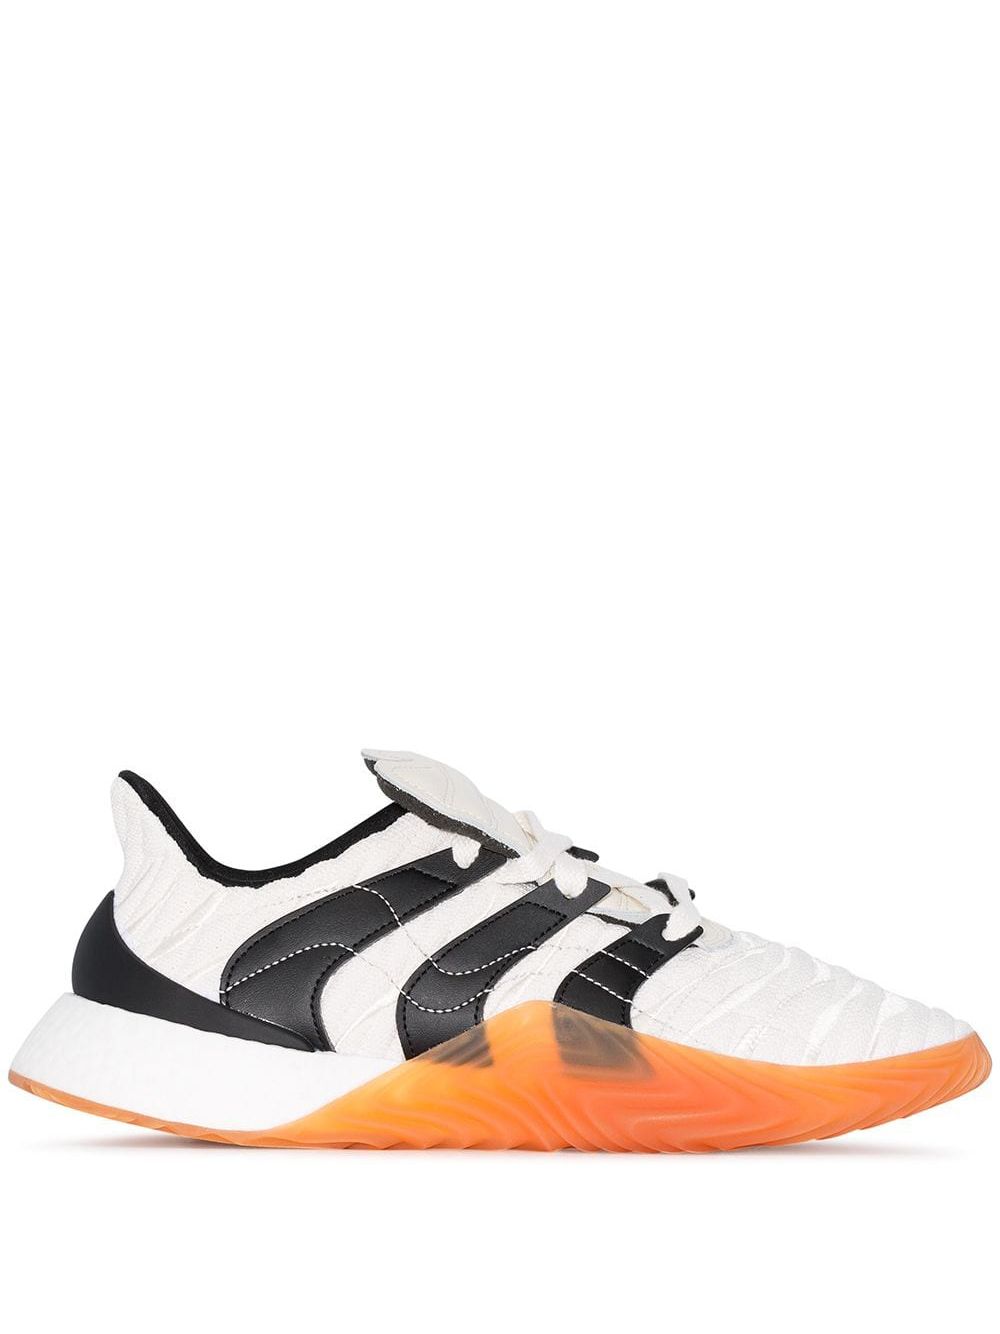 Shop white adidas Sobakov sneakers with Express Delivery - Farfetch